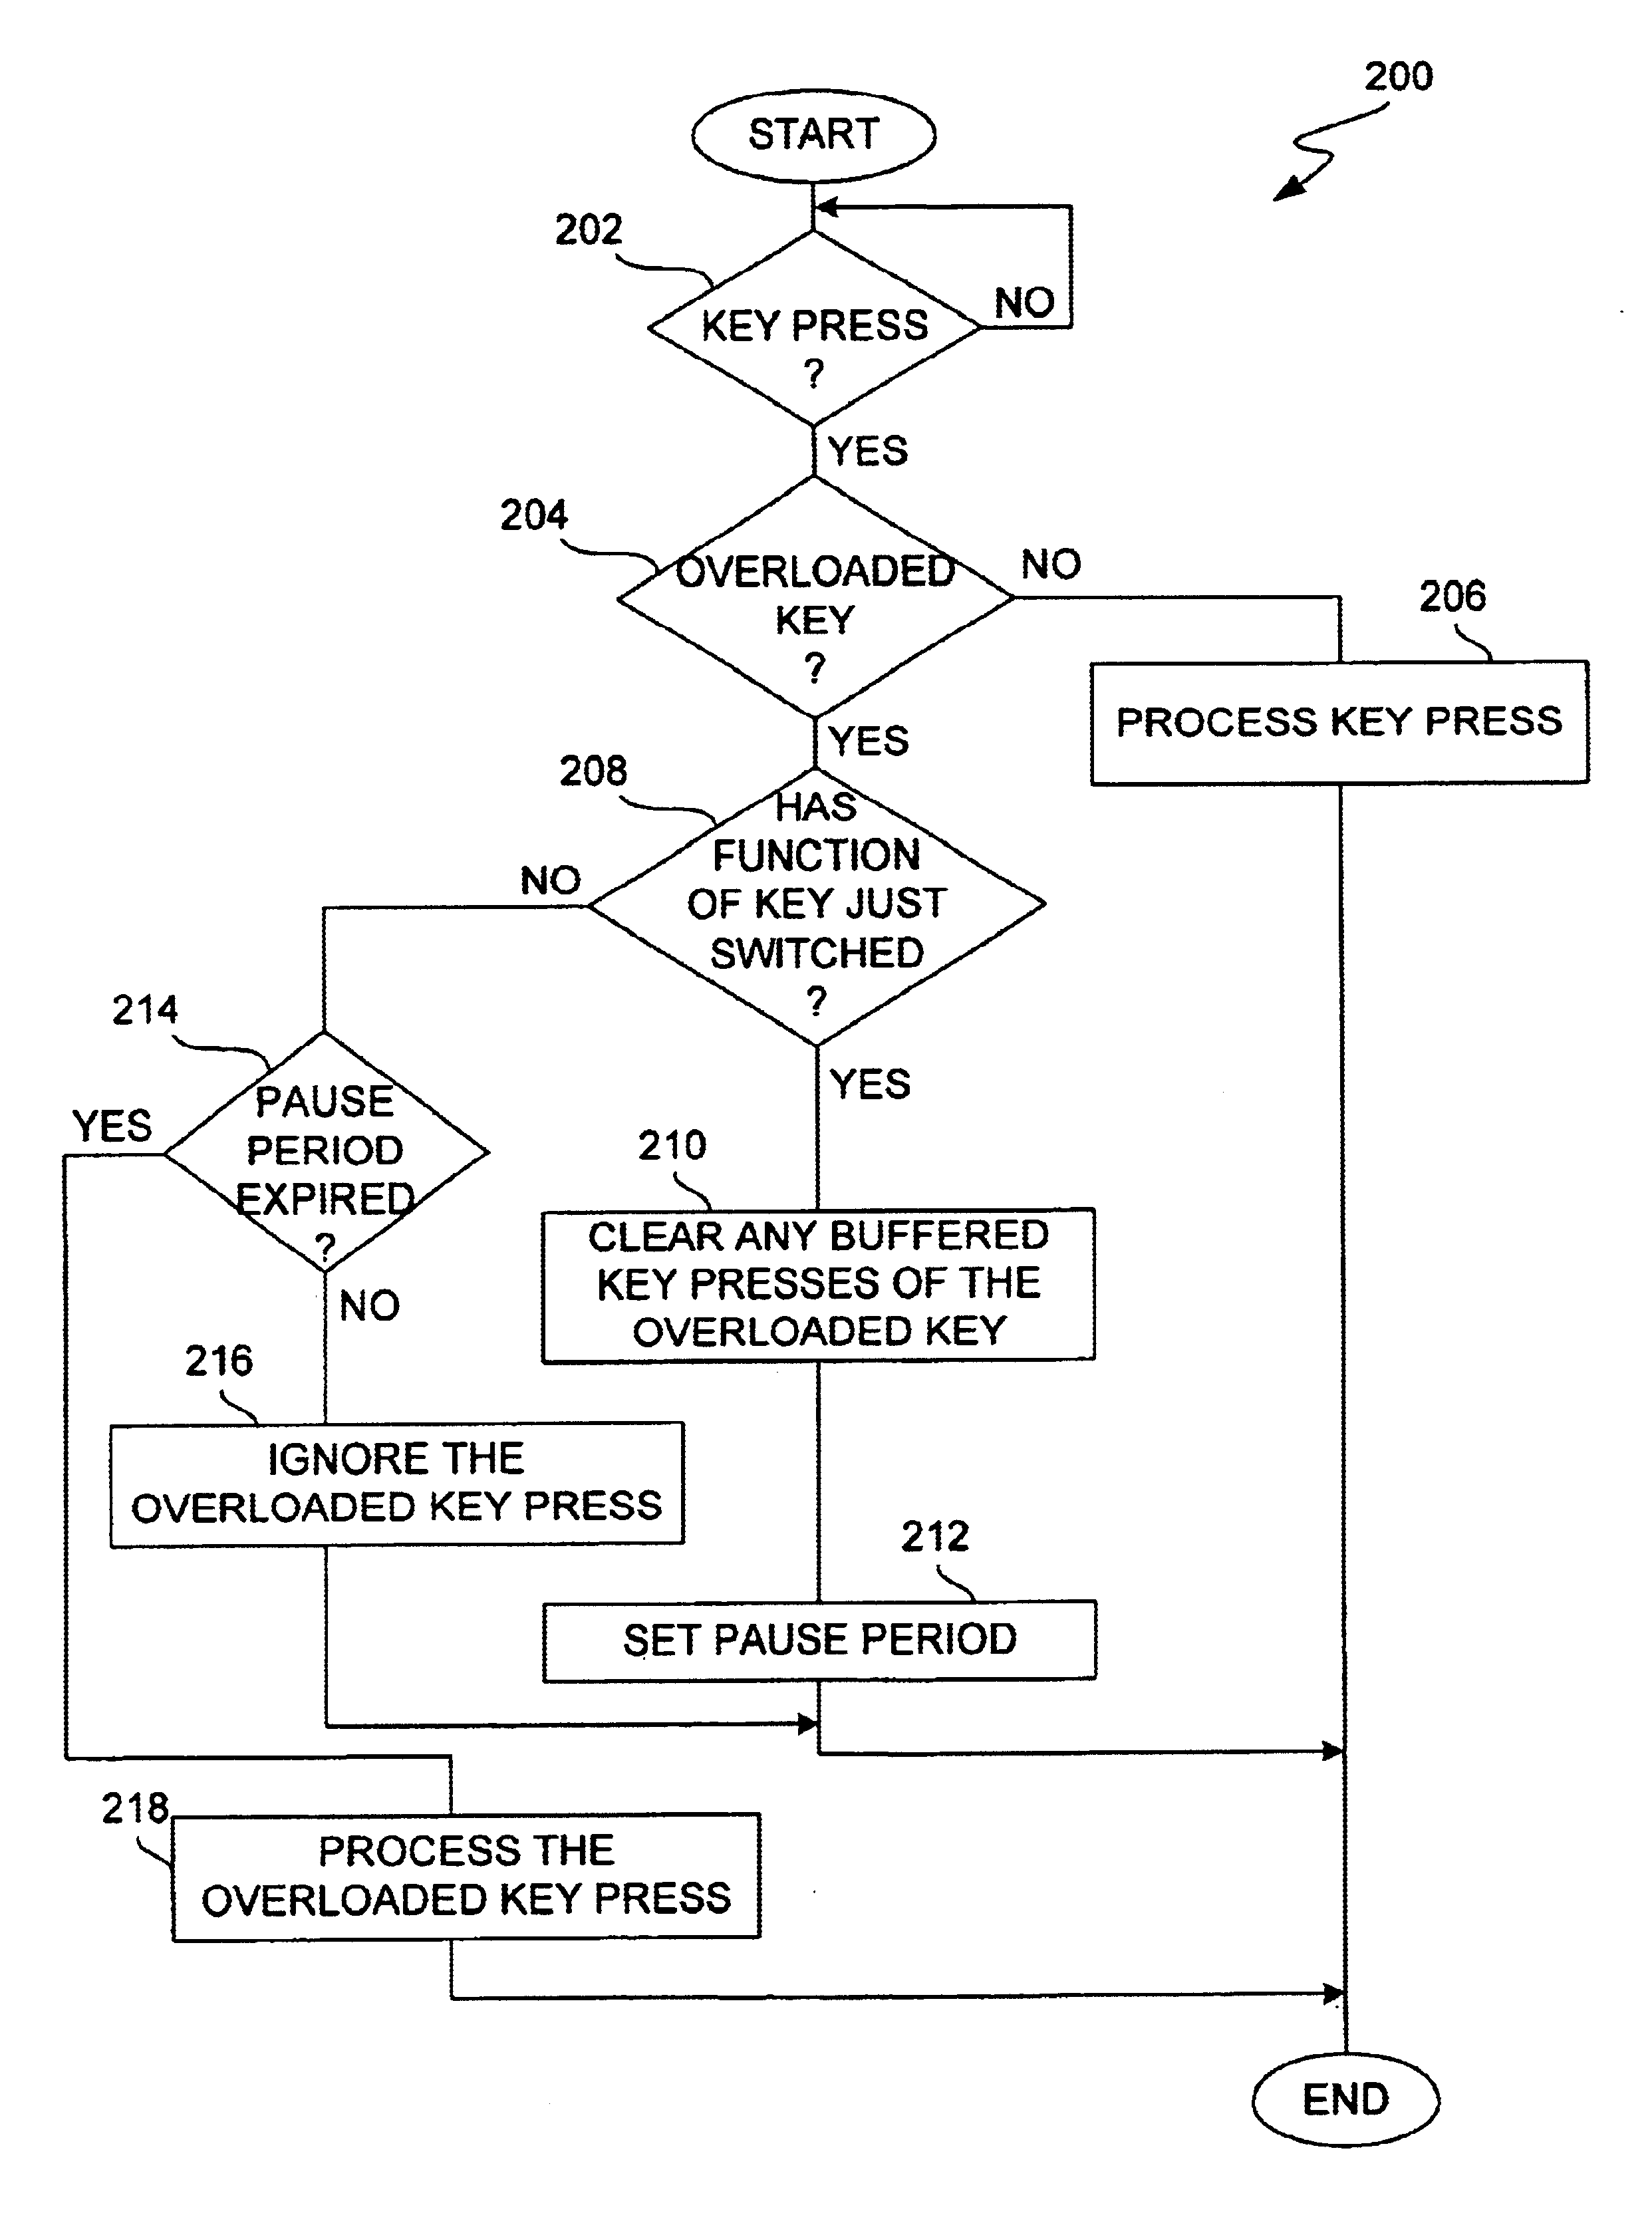 Method and system for processing overloaded keys of a mobile device